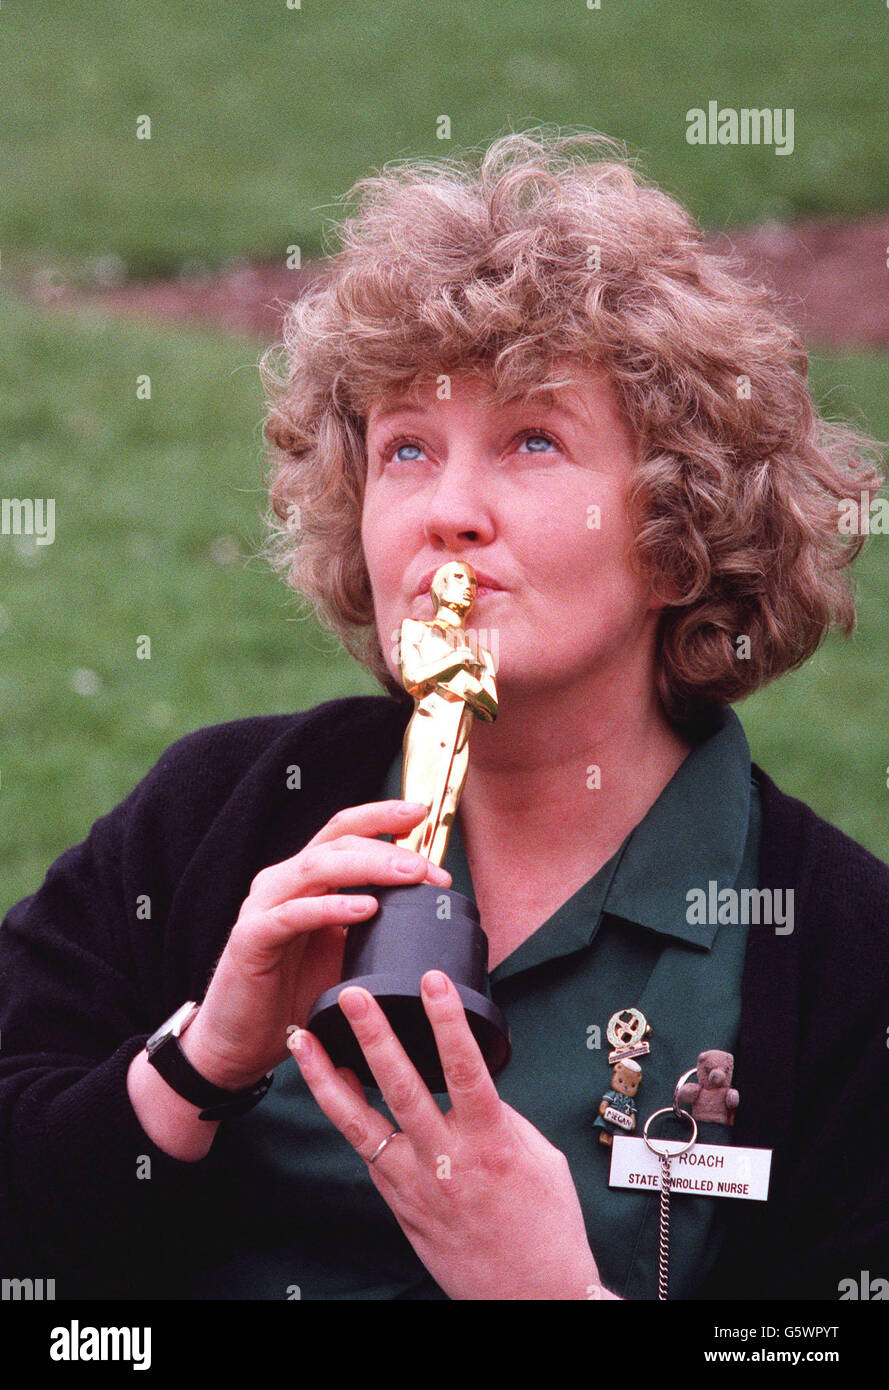 Oscar winning actress Brenda Fricker in her 'Casualty' uniform between takes at Bristol. Brenda won her Oscar for her performance as mother of cerebral palsy victim Christy Brown in the film 'My Left Foot'. Stock Photo